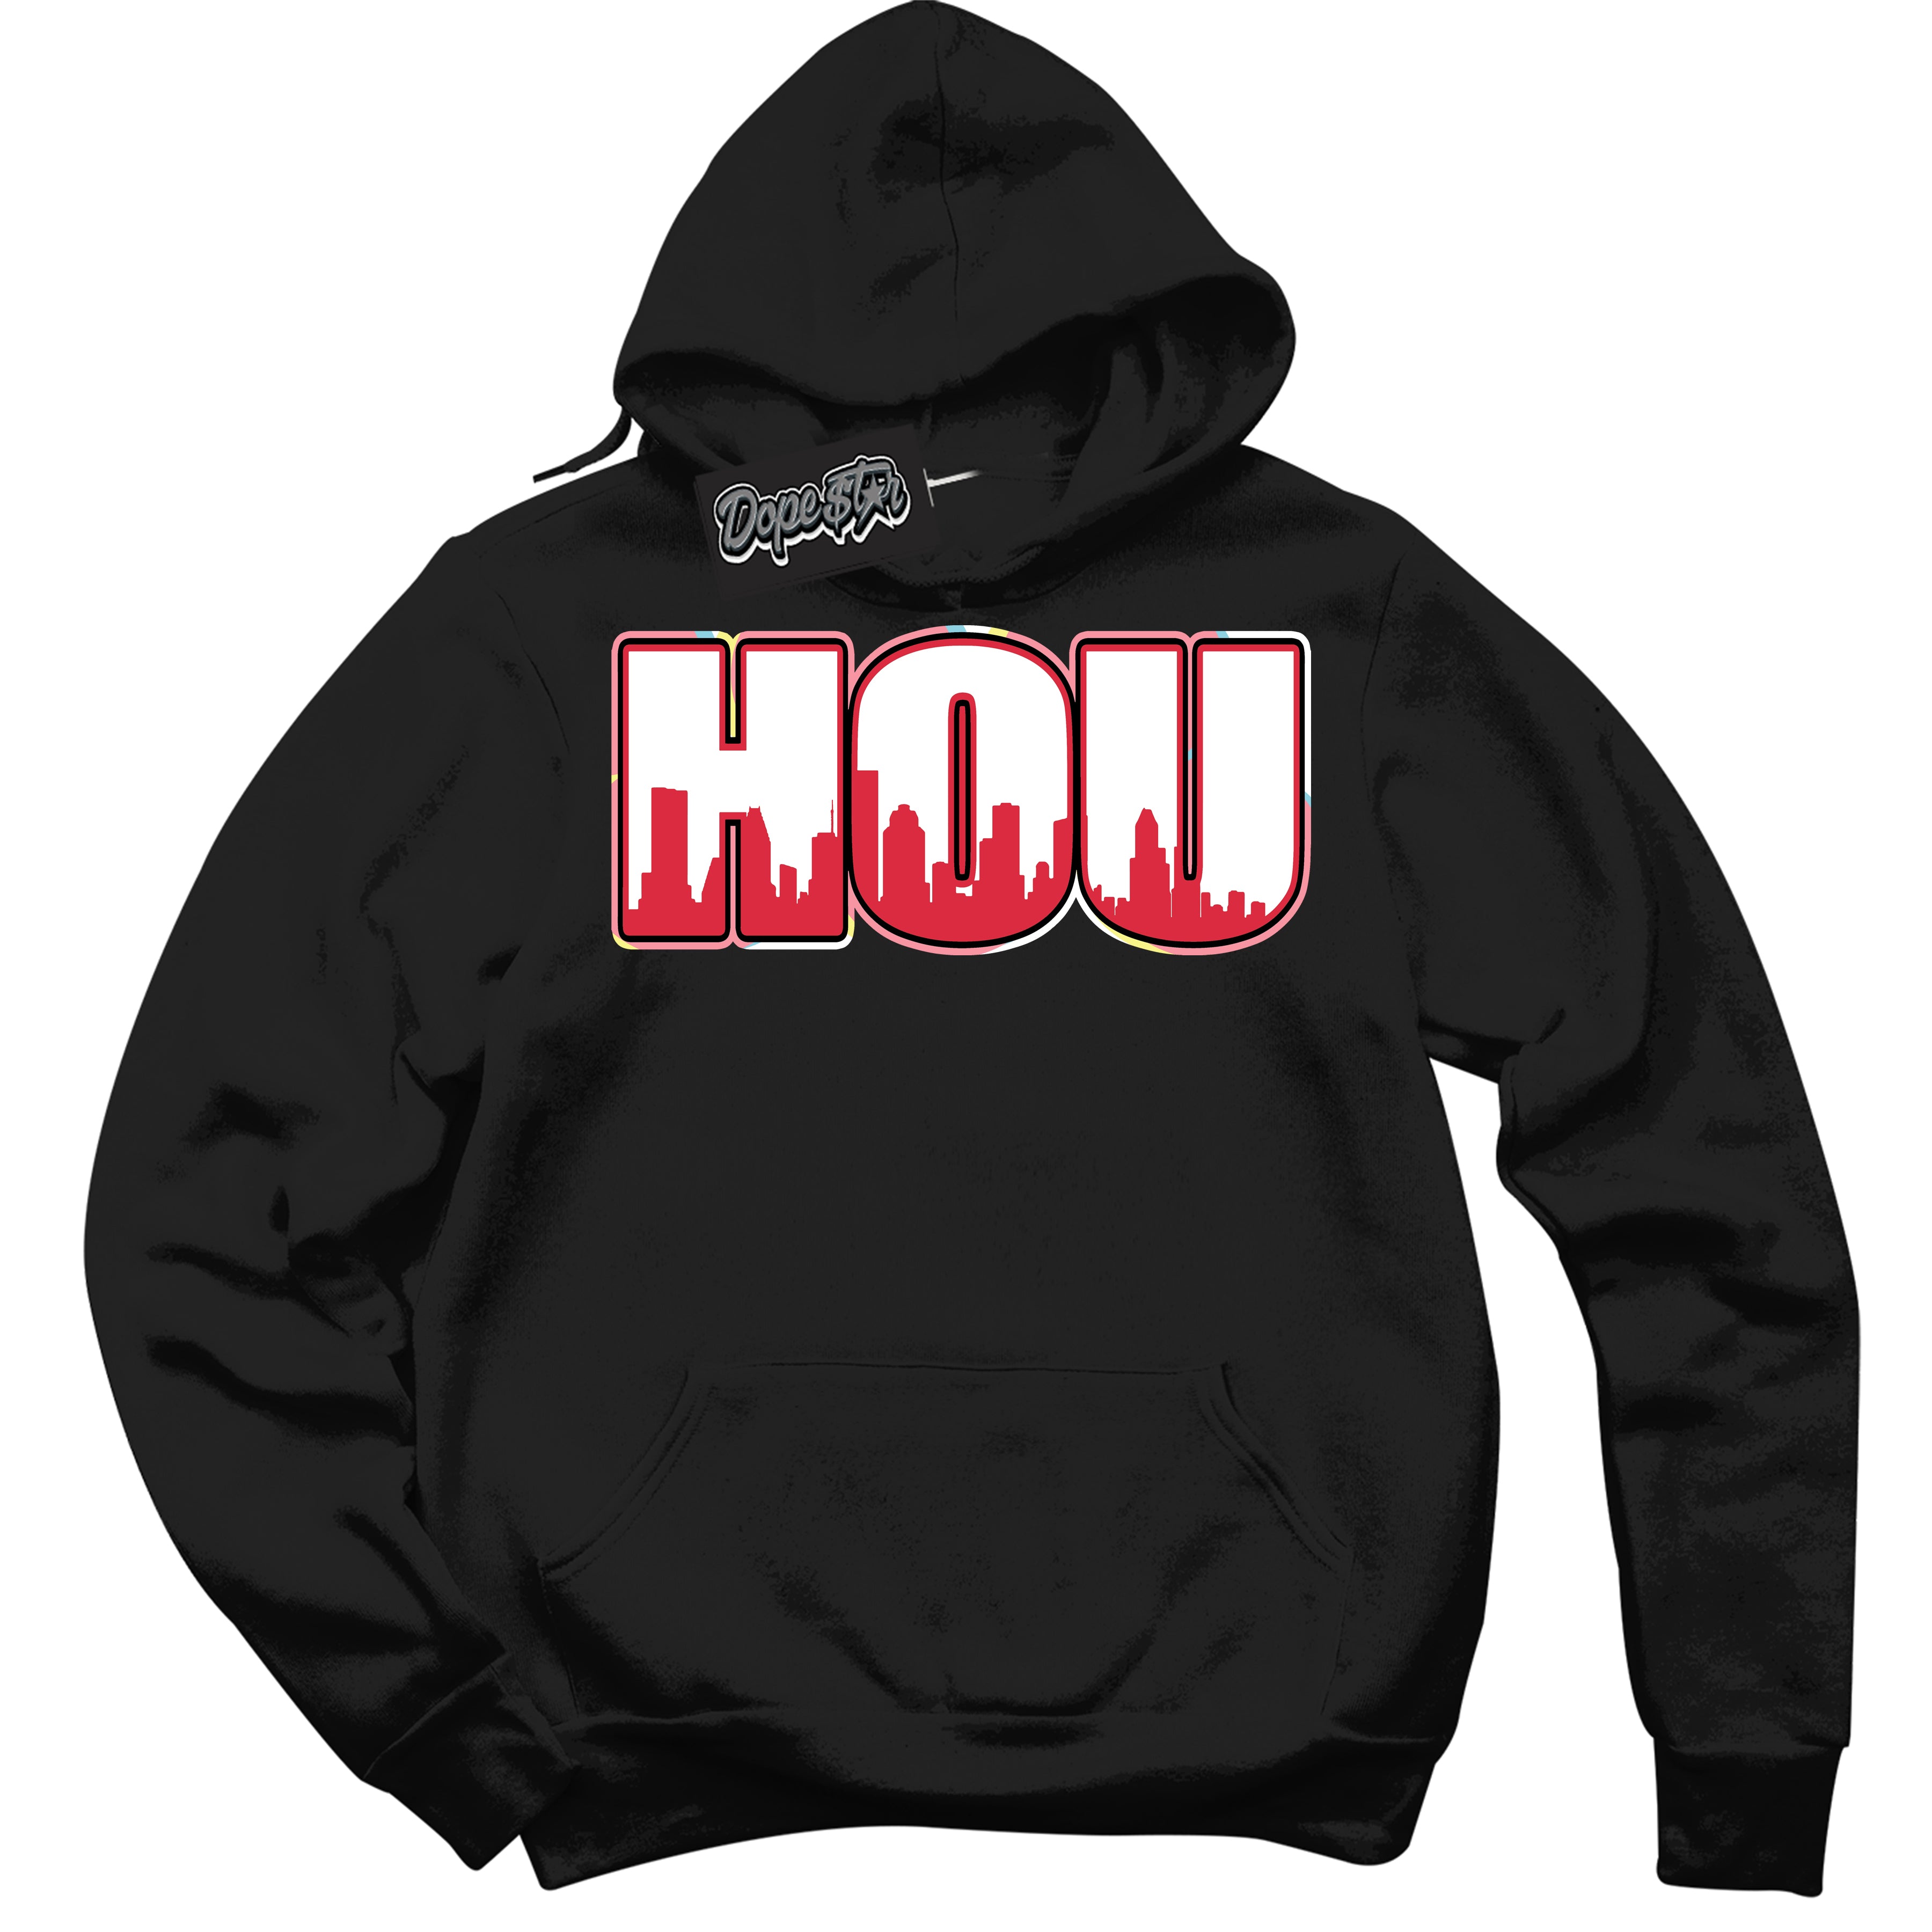 Cool Black Graphic DopeStar Hoodie with “ Houston “ print, that perfectly matches Spider-Verse 1s sneakers